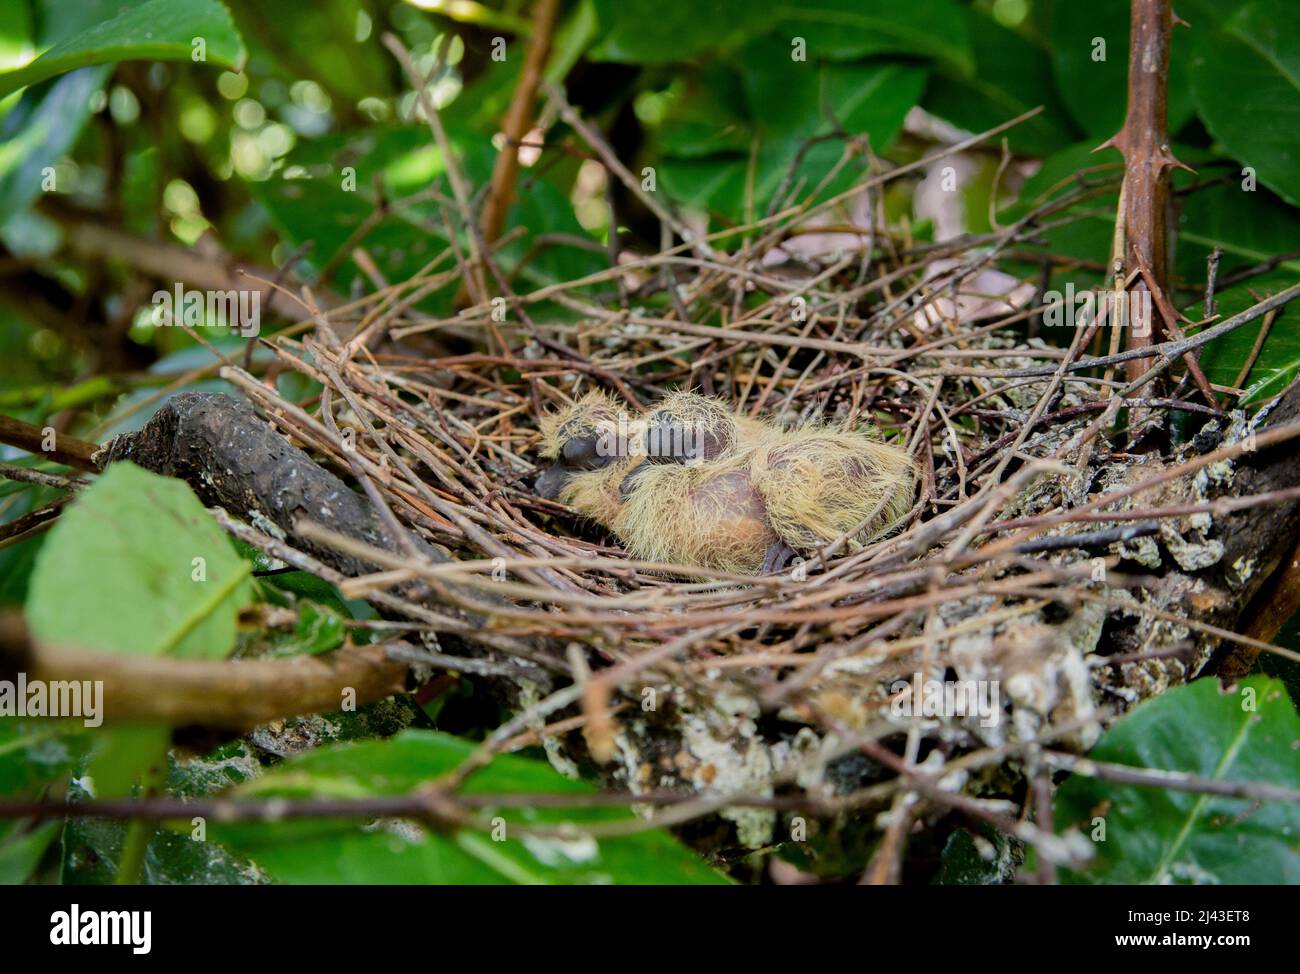 Collared Dove nest, also known as Eurasian Collared Dove, Streptopelia decaocto showing twig nest and two altricial birds, London, United Kingdom, Stock Photo